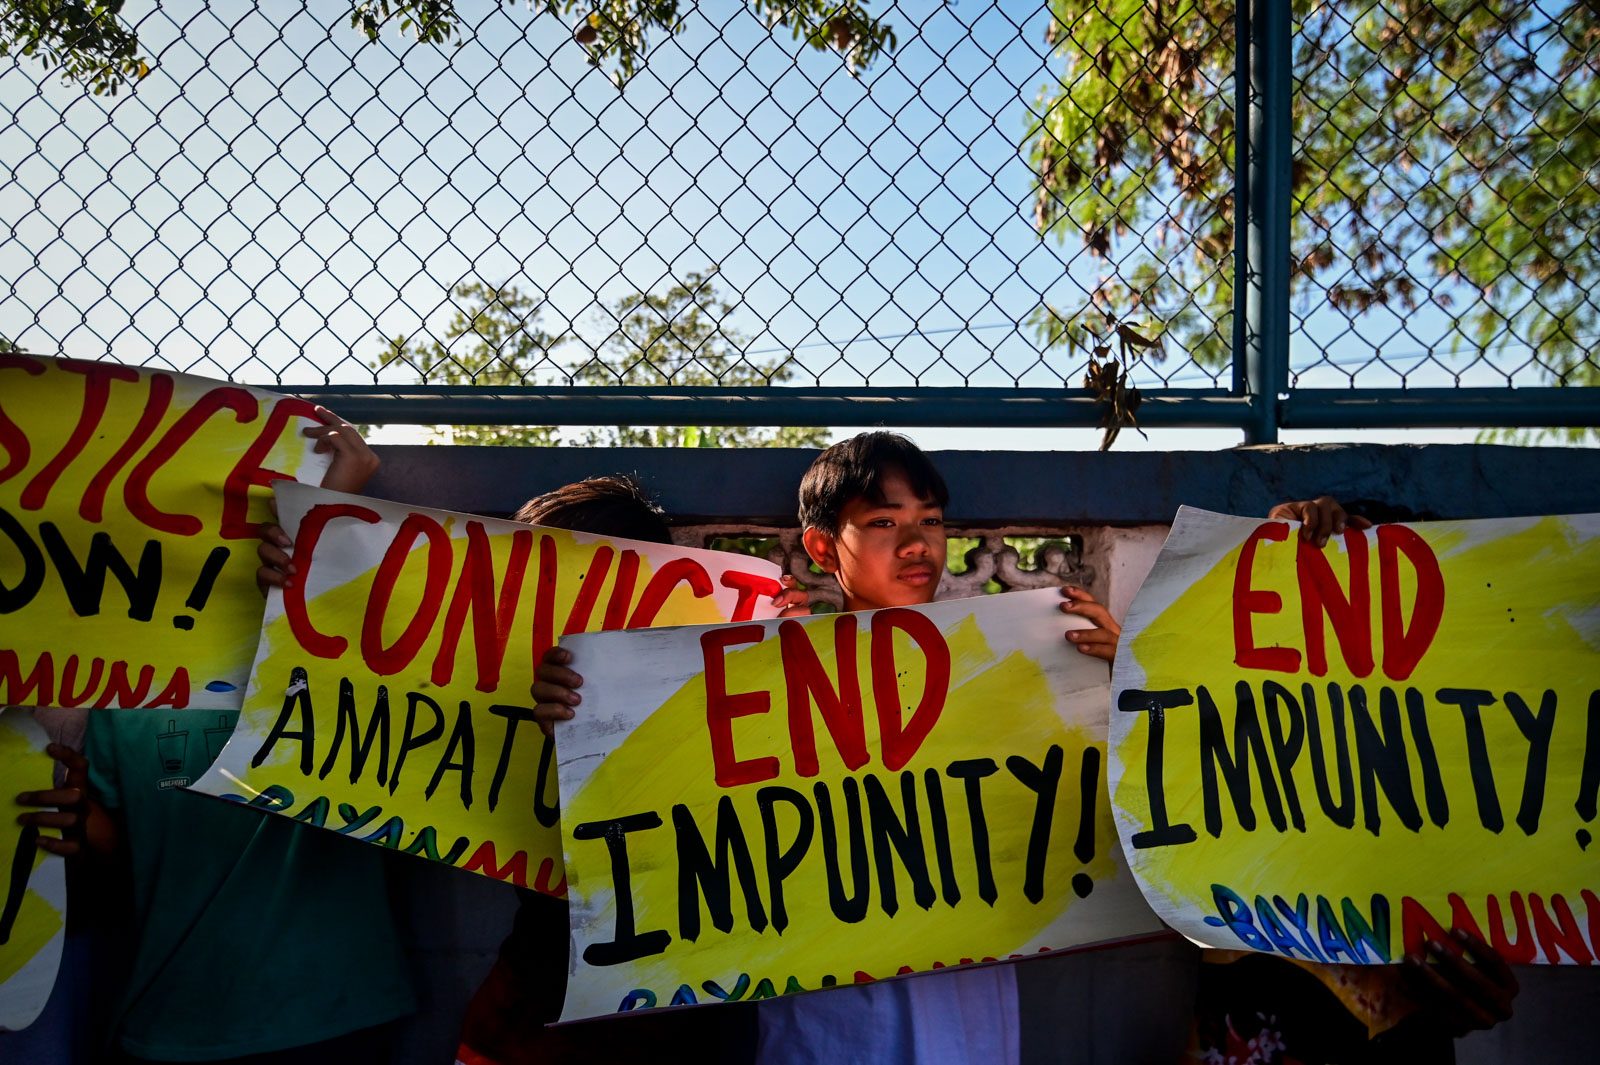 HRW: Use Ampatuan conviction to push for reforms vs culture of impunity